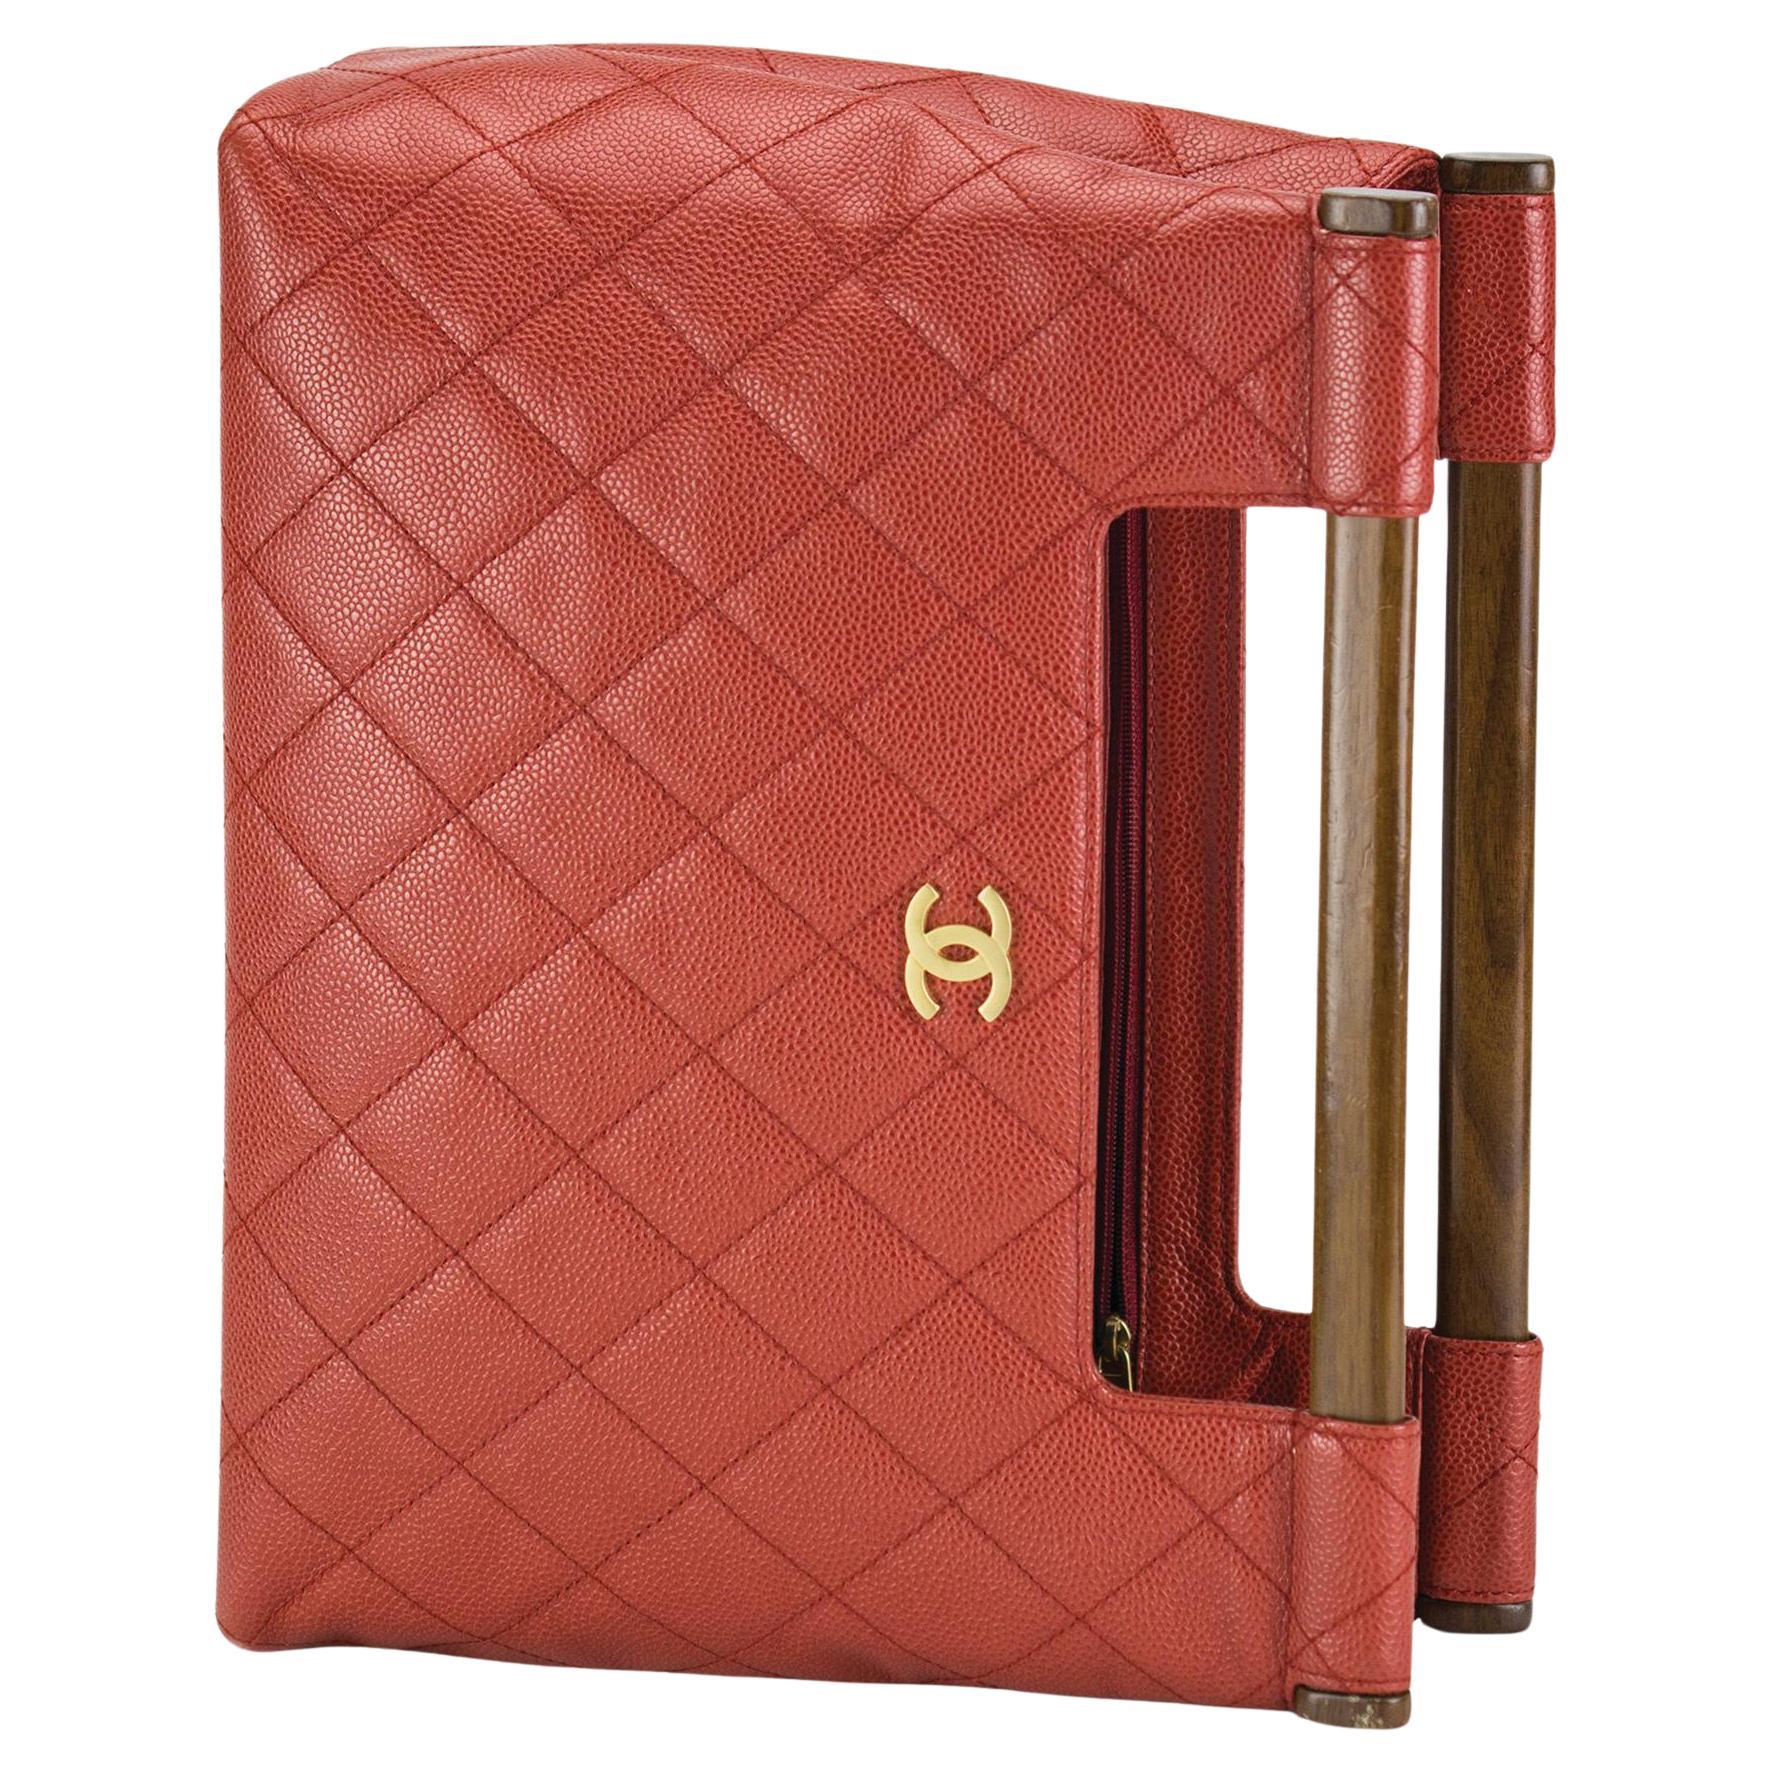 Chanel 2003 Holz Top Handle Rare Red Caviar Jumbo Kelly Envelope Clutch Tote Bag im Angebot